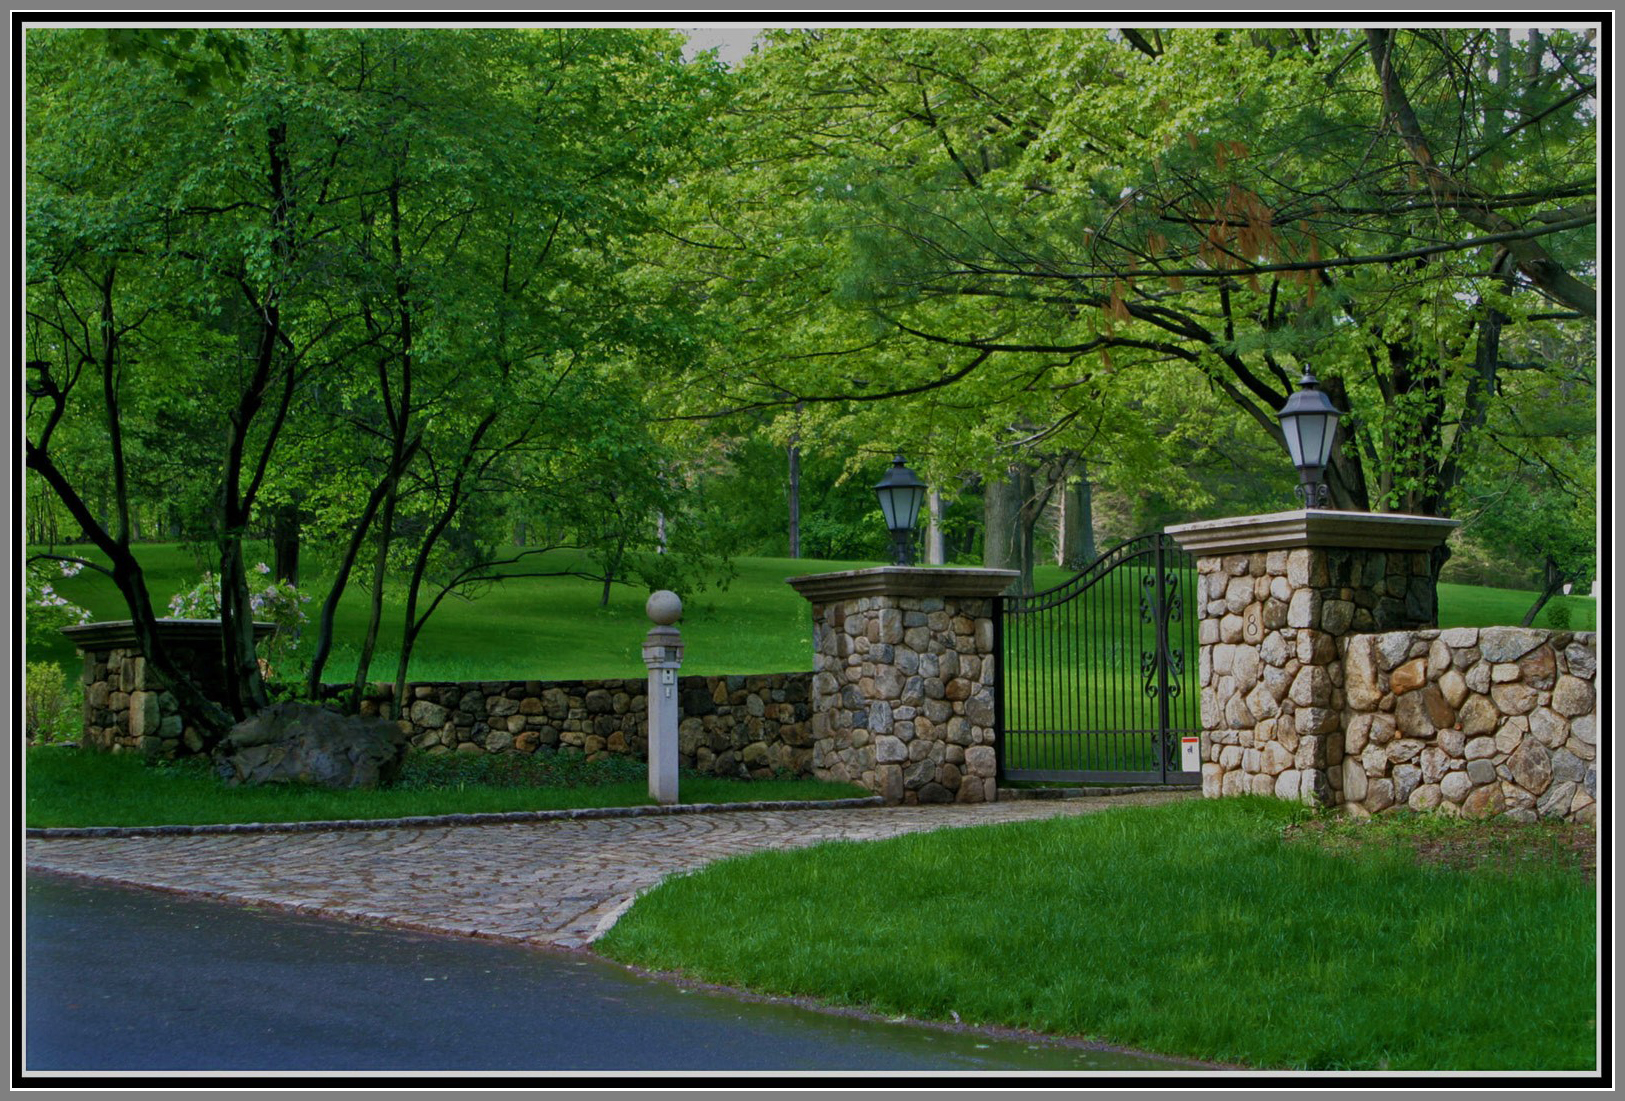 Majestic Gated Entrance by Artistic Outdoors